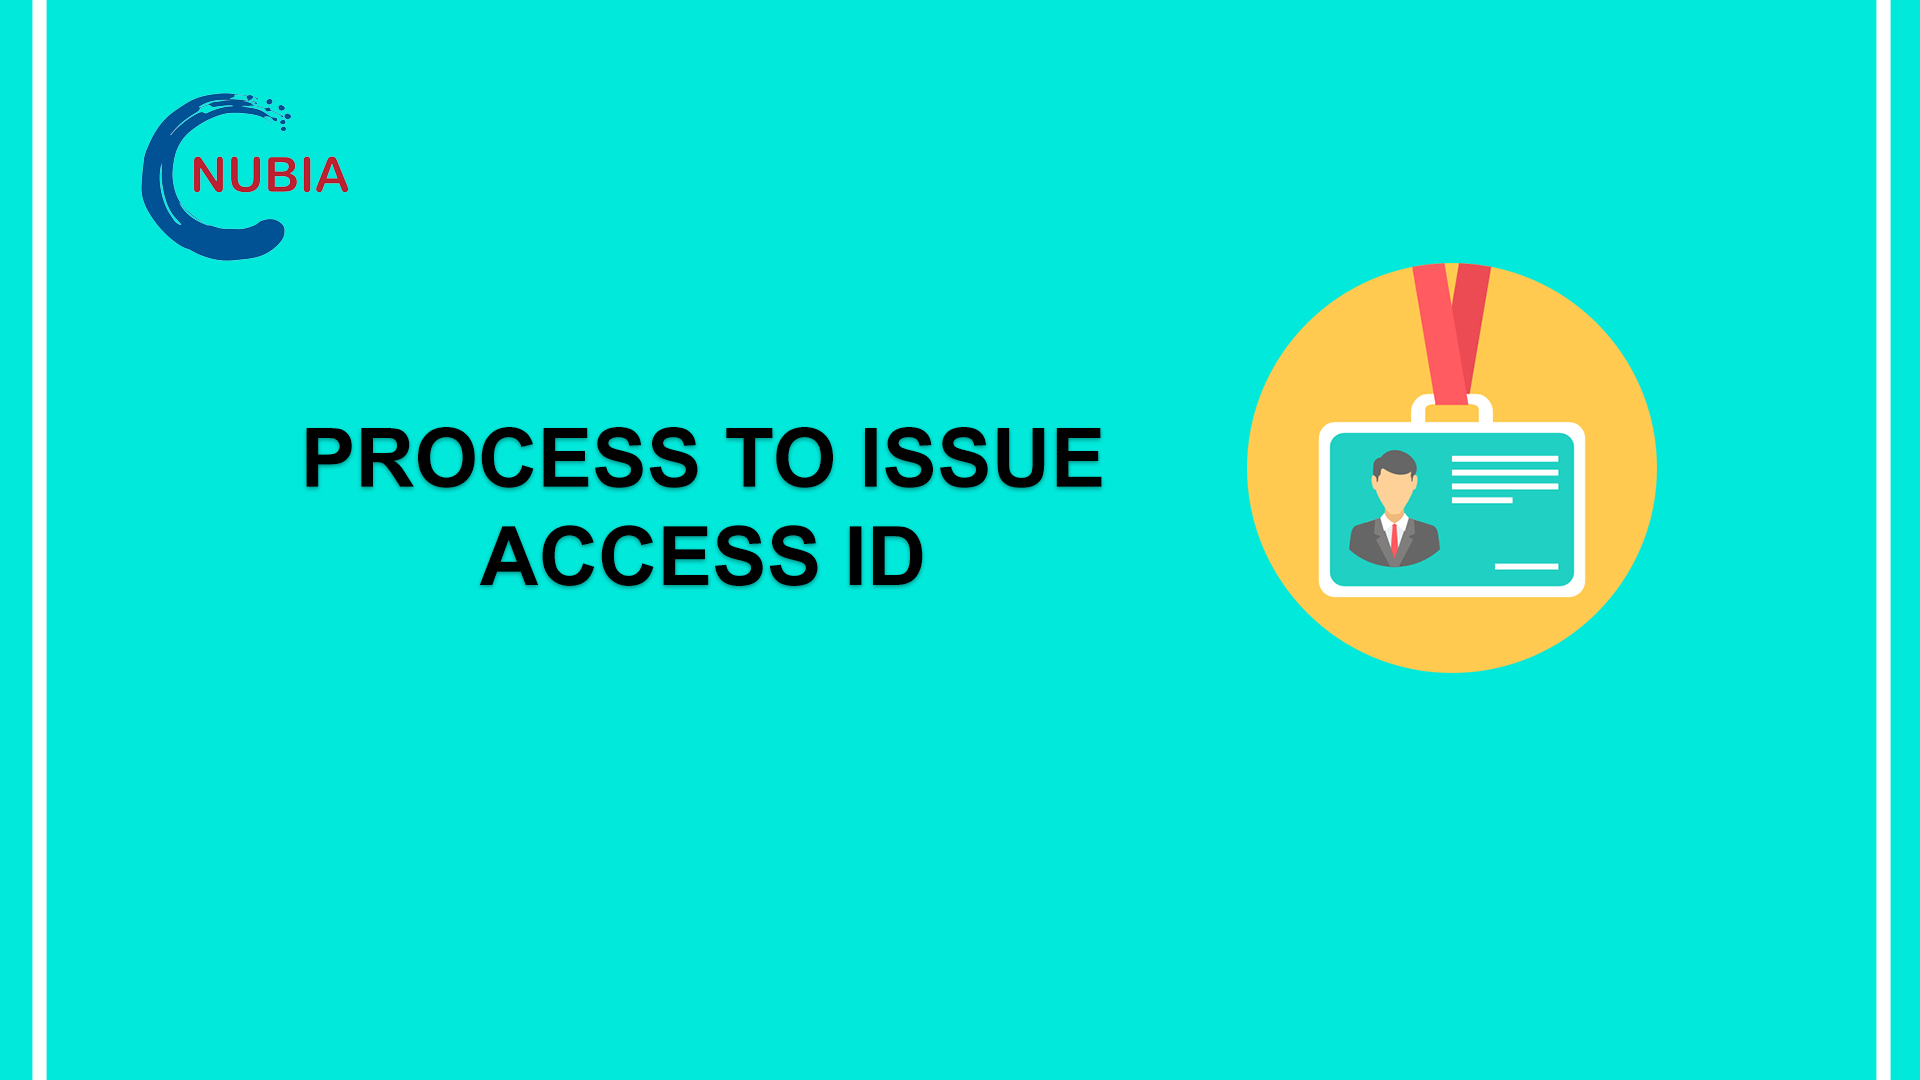 PROCESS TO ISSUE ACCESS ID